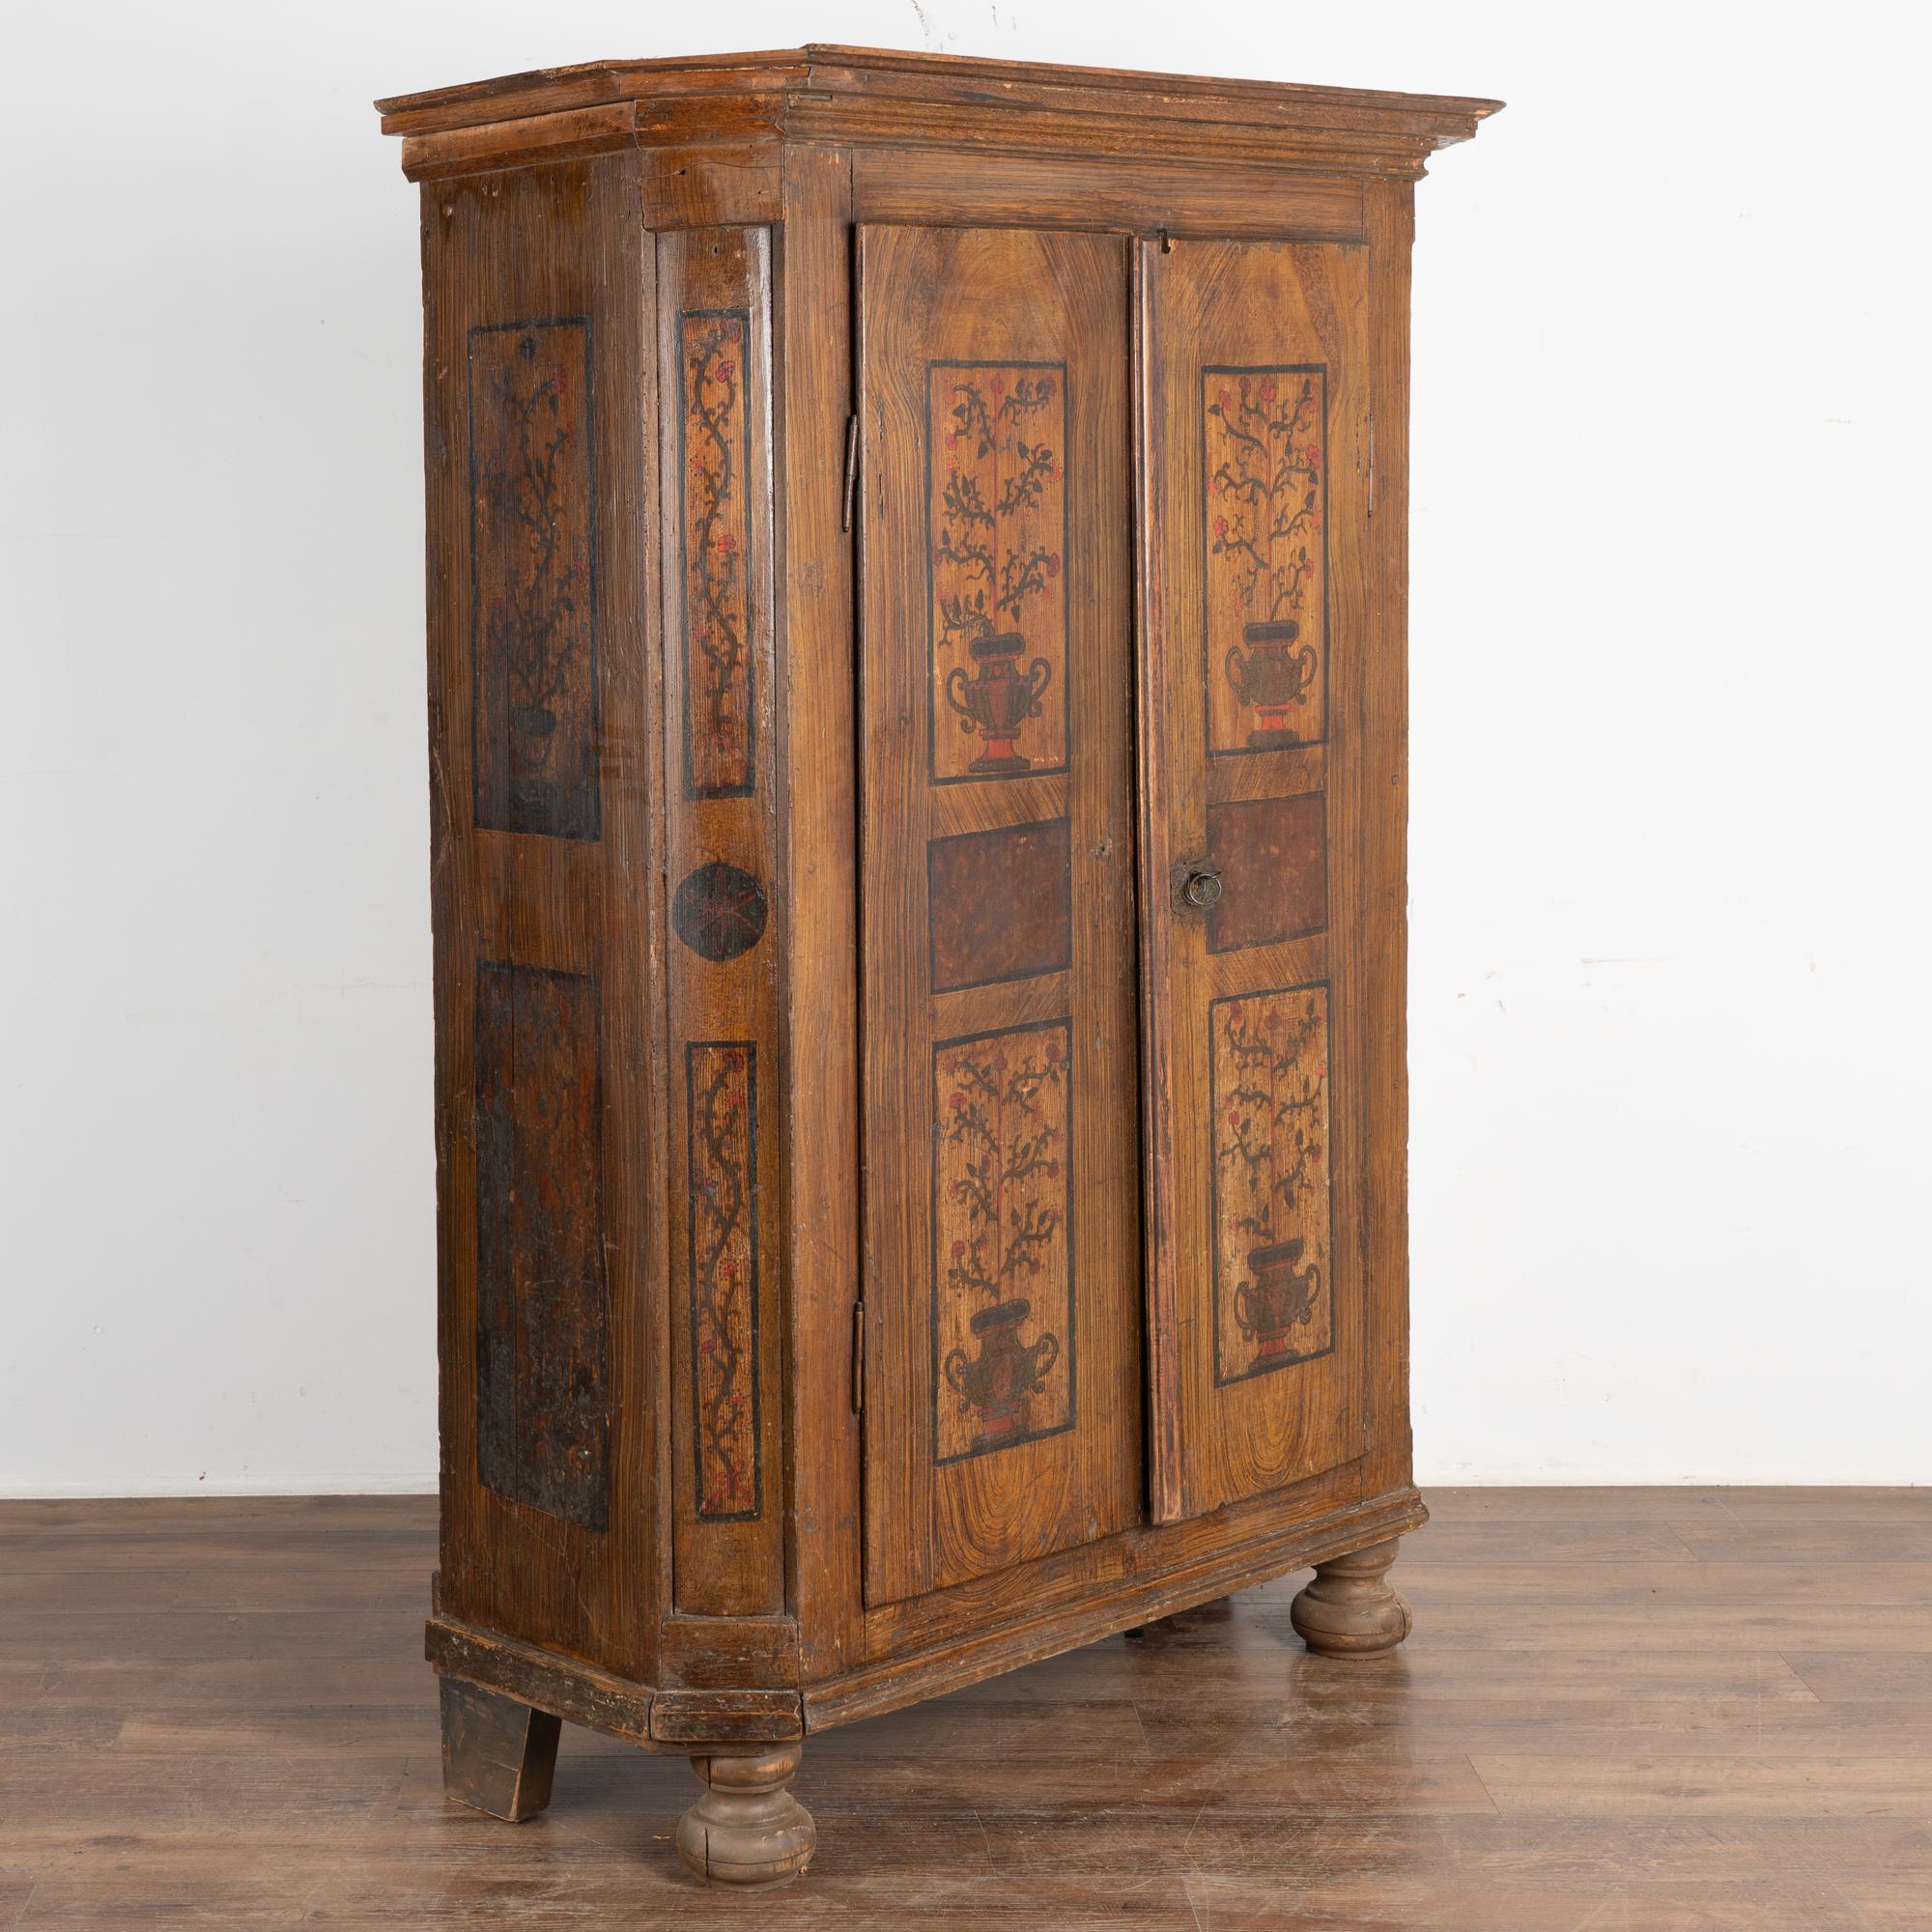 This painted pine armoire still maintains the quality and details of the original hand-painted finish in an earth tone pallet.
The floral patterns against the faux wood painted background were the traditional folk art style of the era.
Notice how